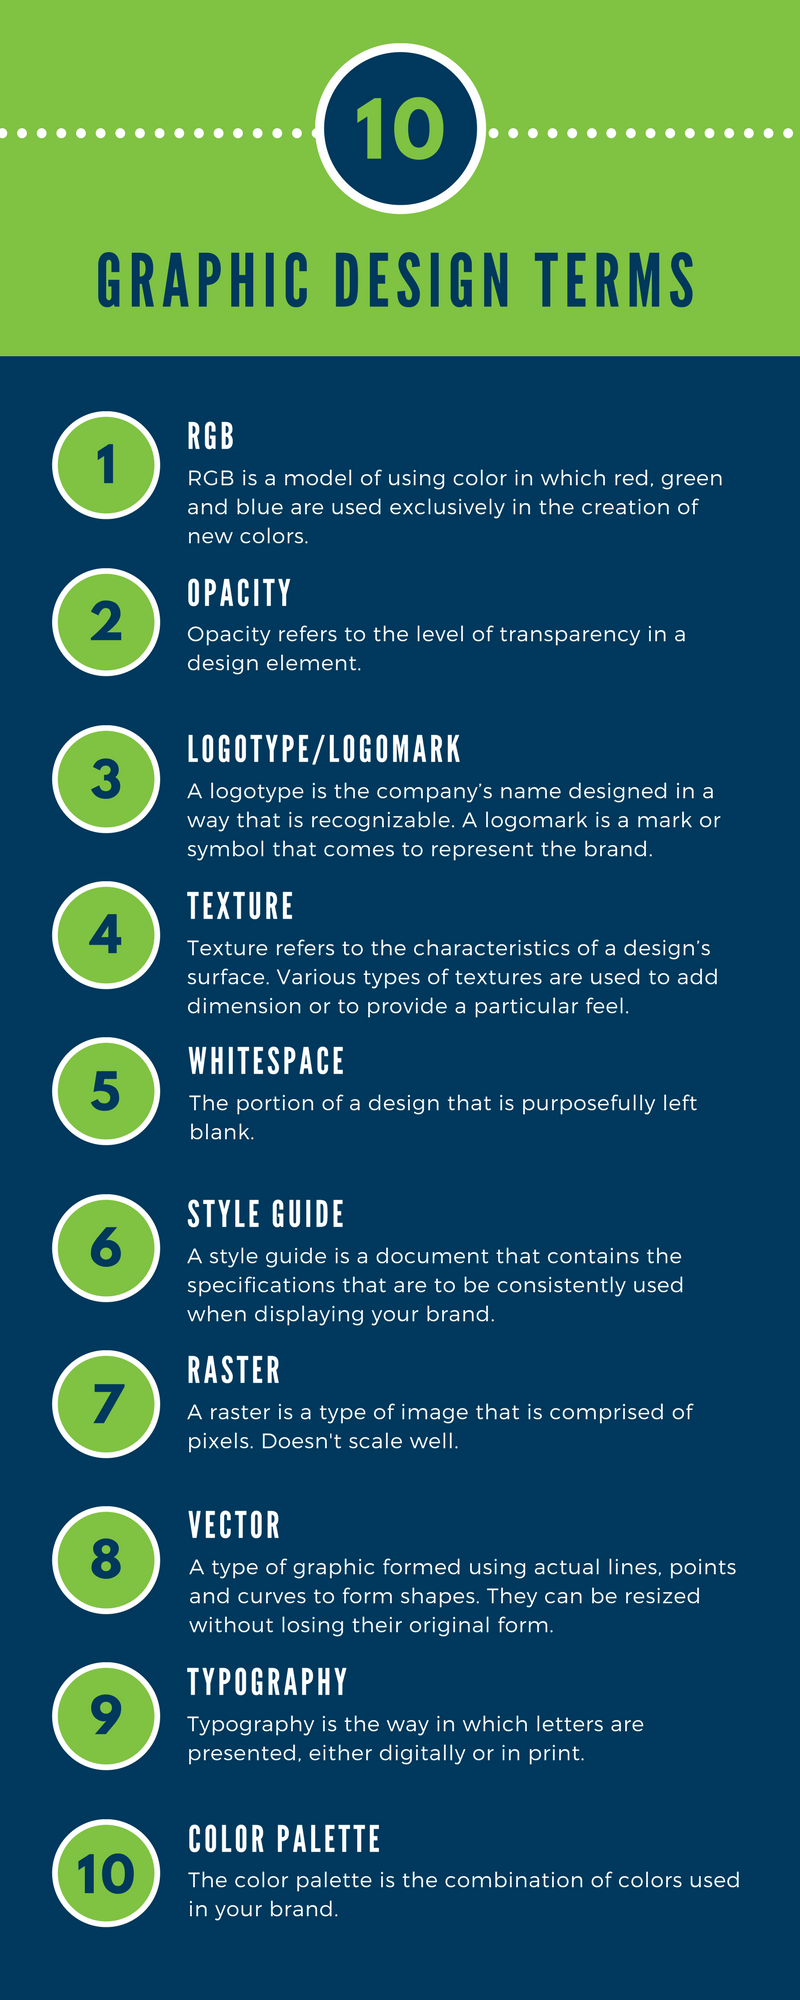 Graphic Design Terms Infographic